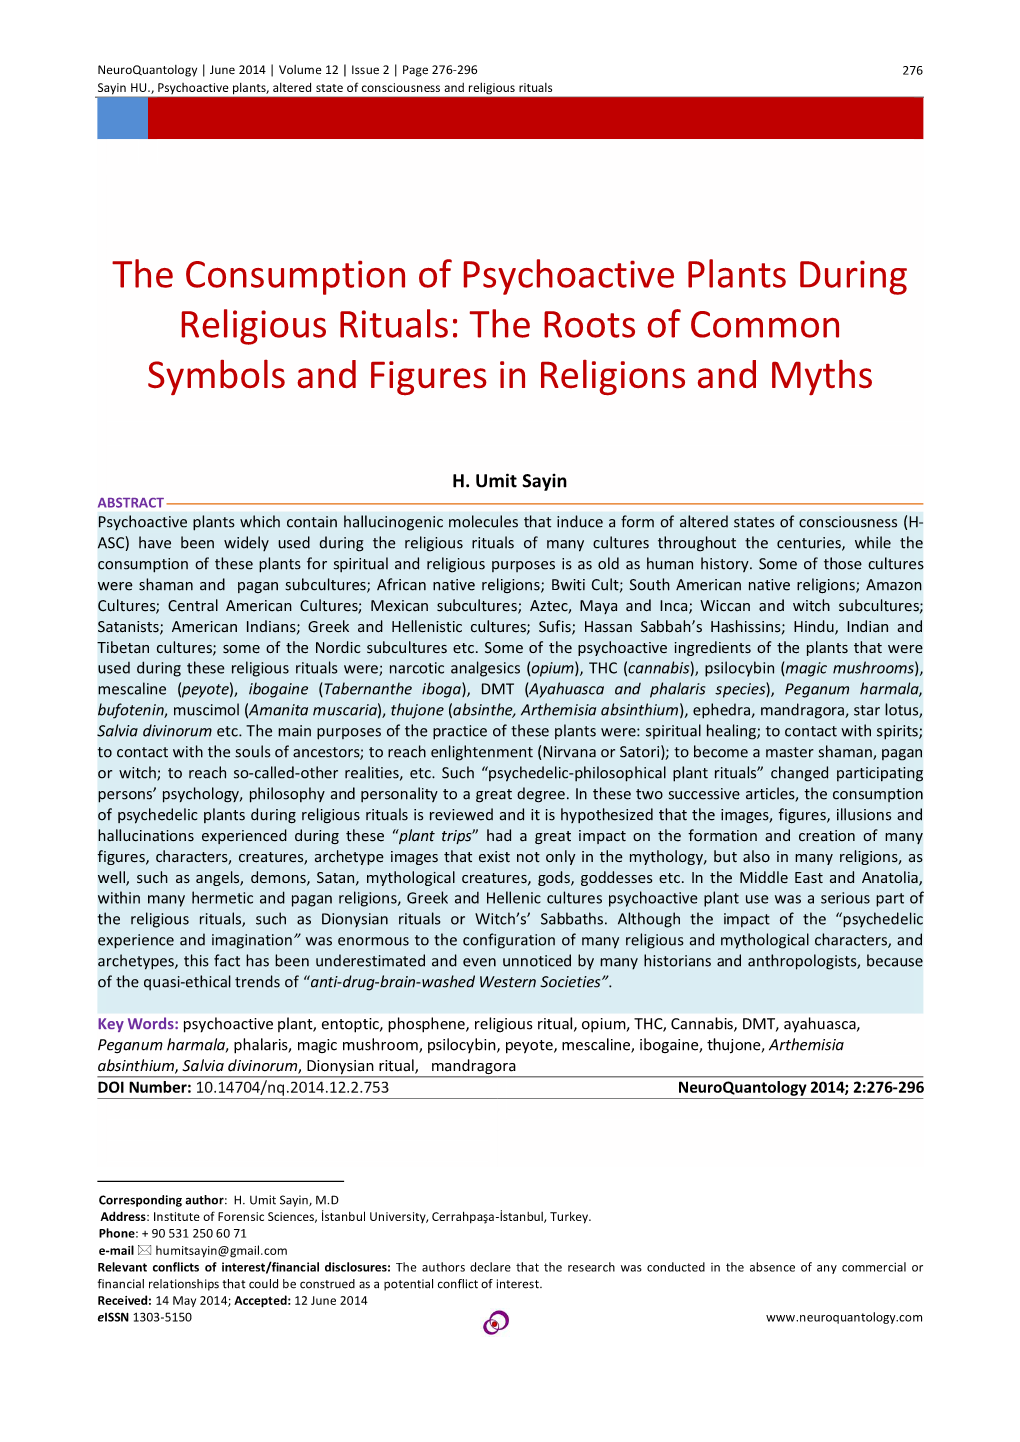 The Consumption of Psychoactive Plants During Religious Rituals: the Roots of Common Symbols and Figures in Religions and Myths